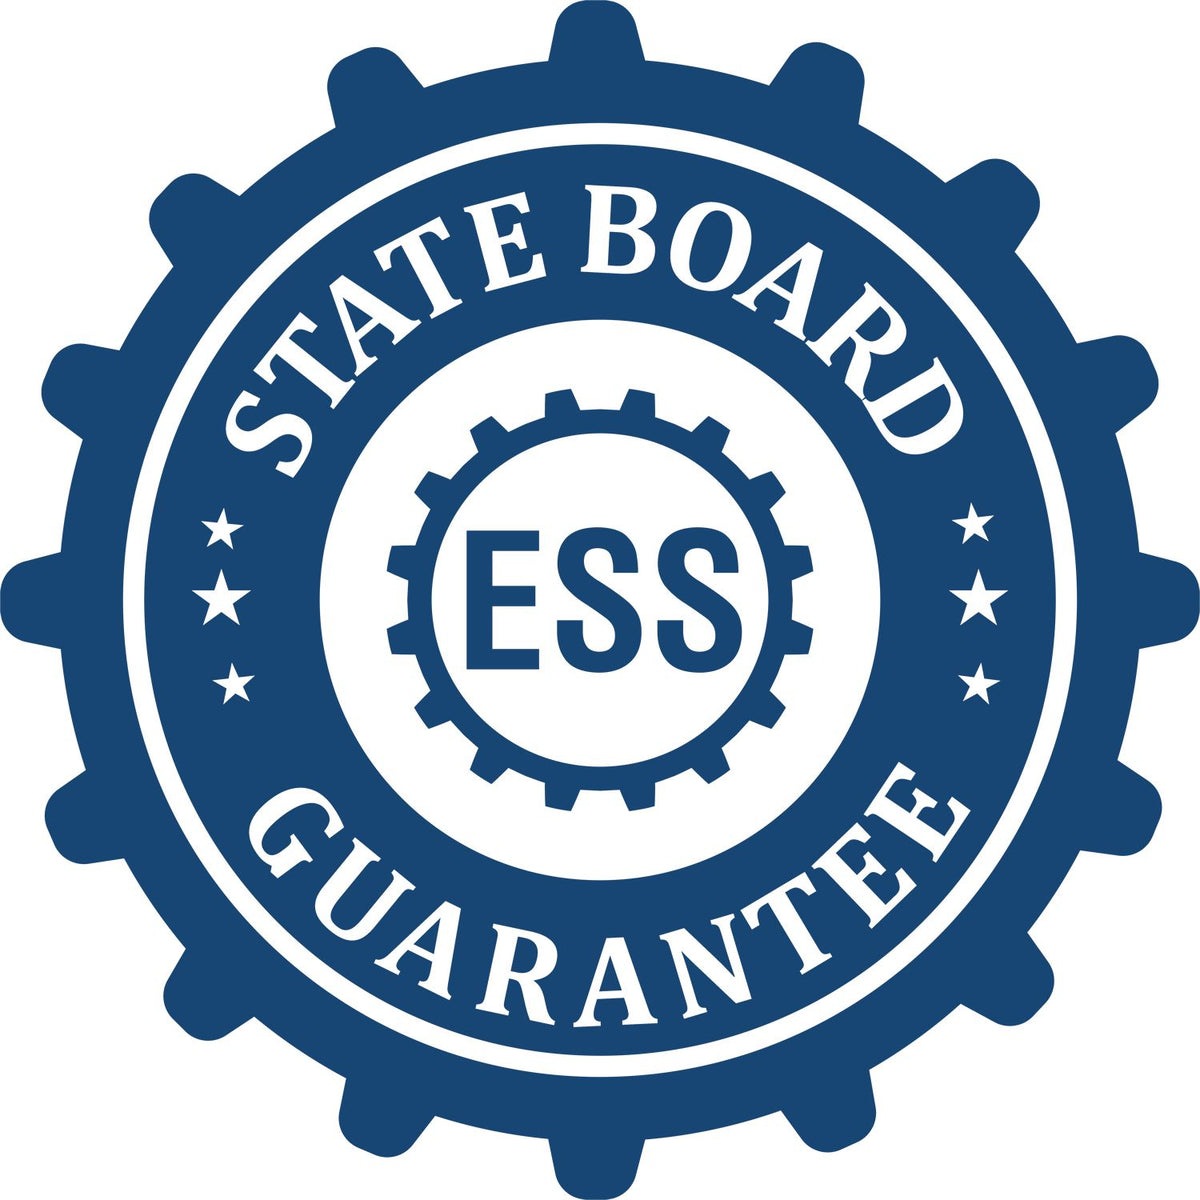 An emblem in a gear shape illustrating a state board guarantee for the Hybrid Guam Land Surveyor Seal